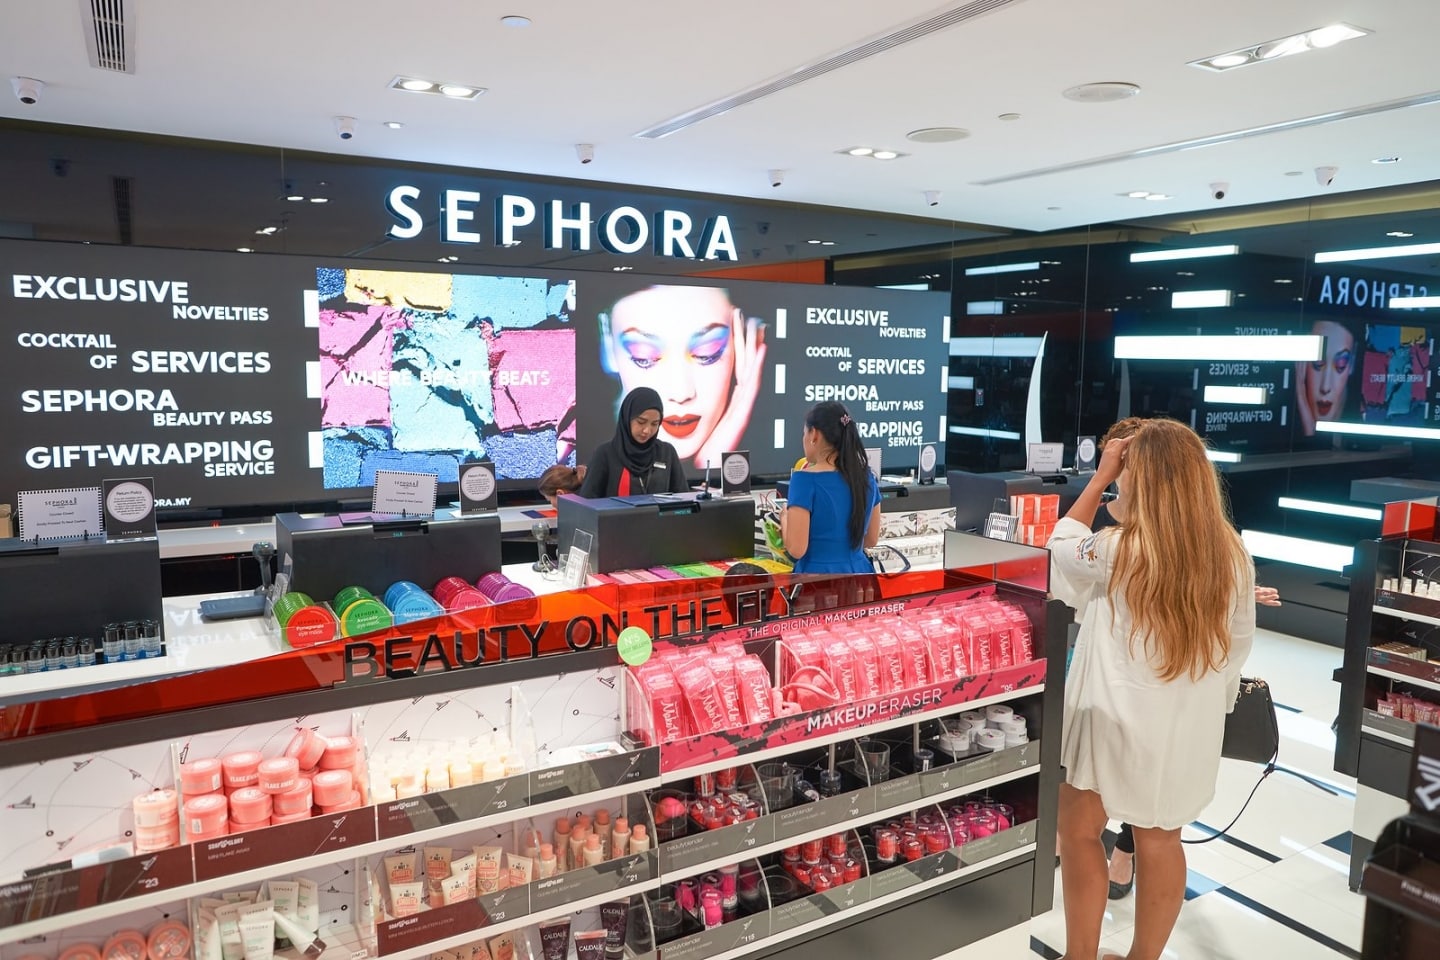 How Sephora, Refinery29 and Warby Parker are Going Higher Up the Sales Funnel to Increase Conversion